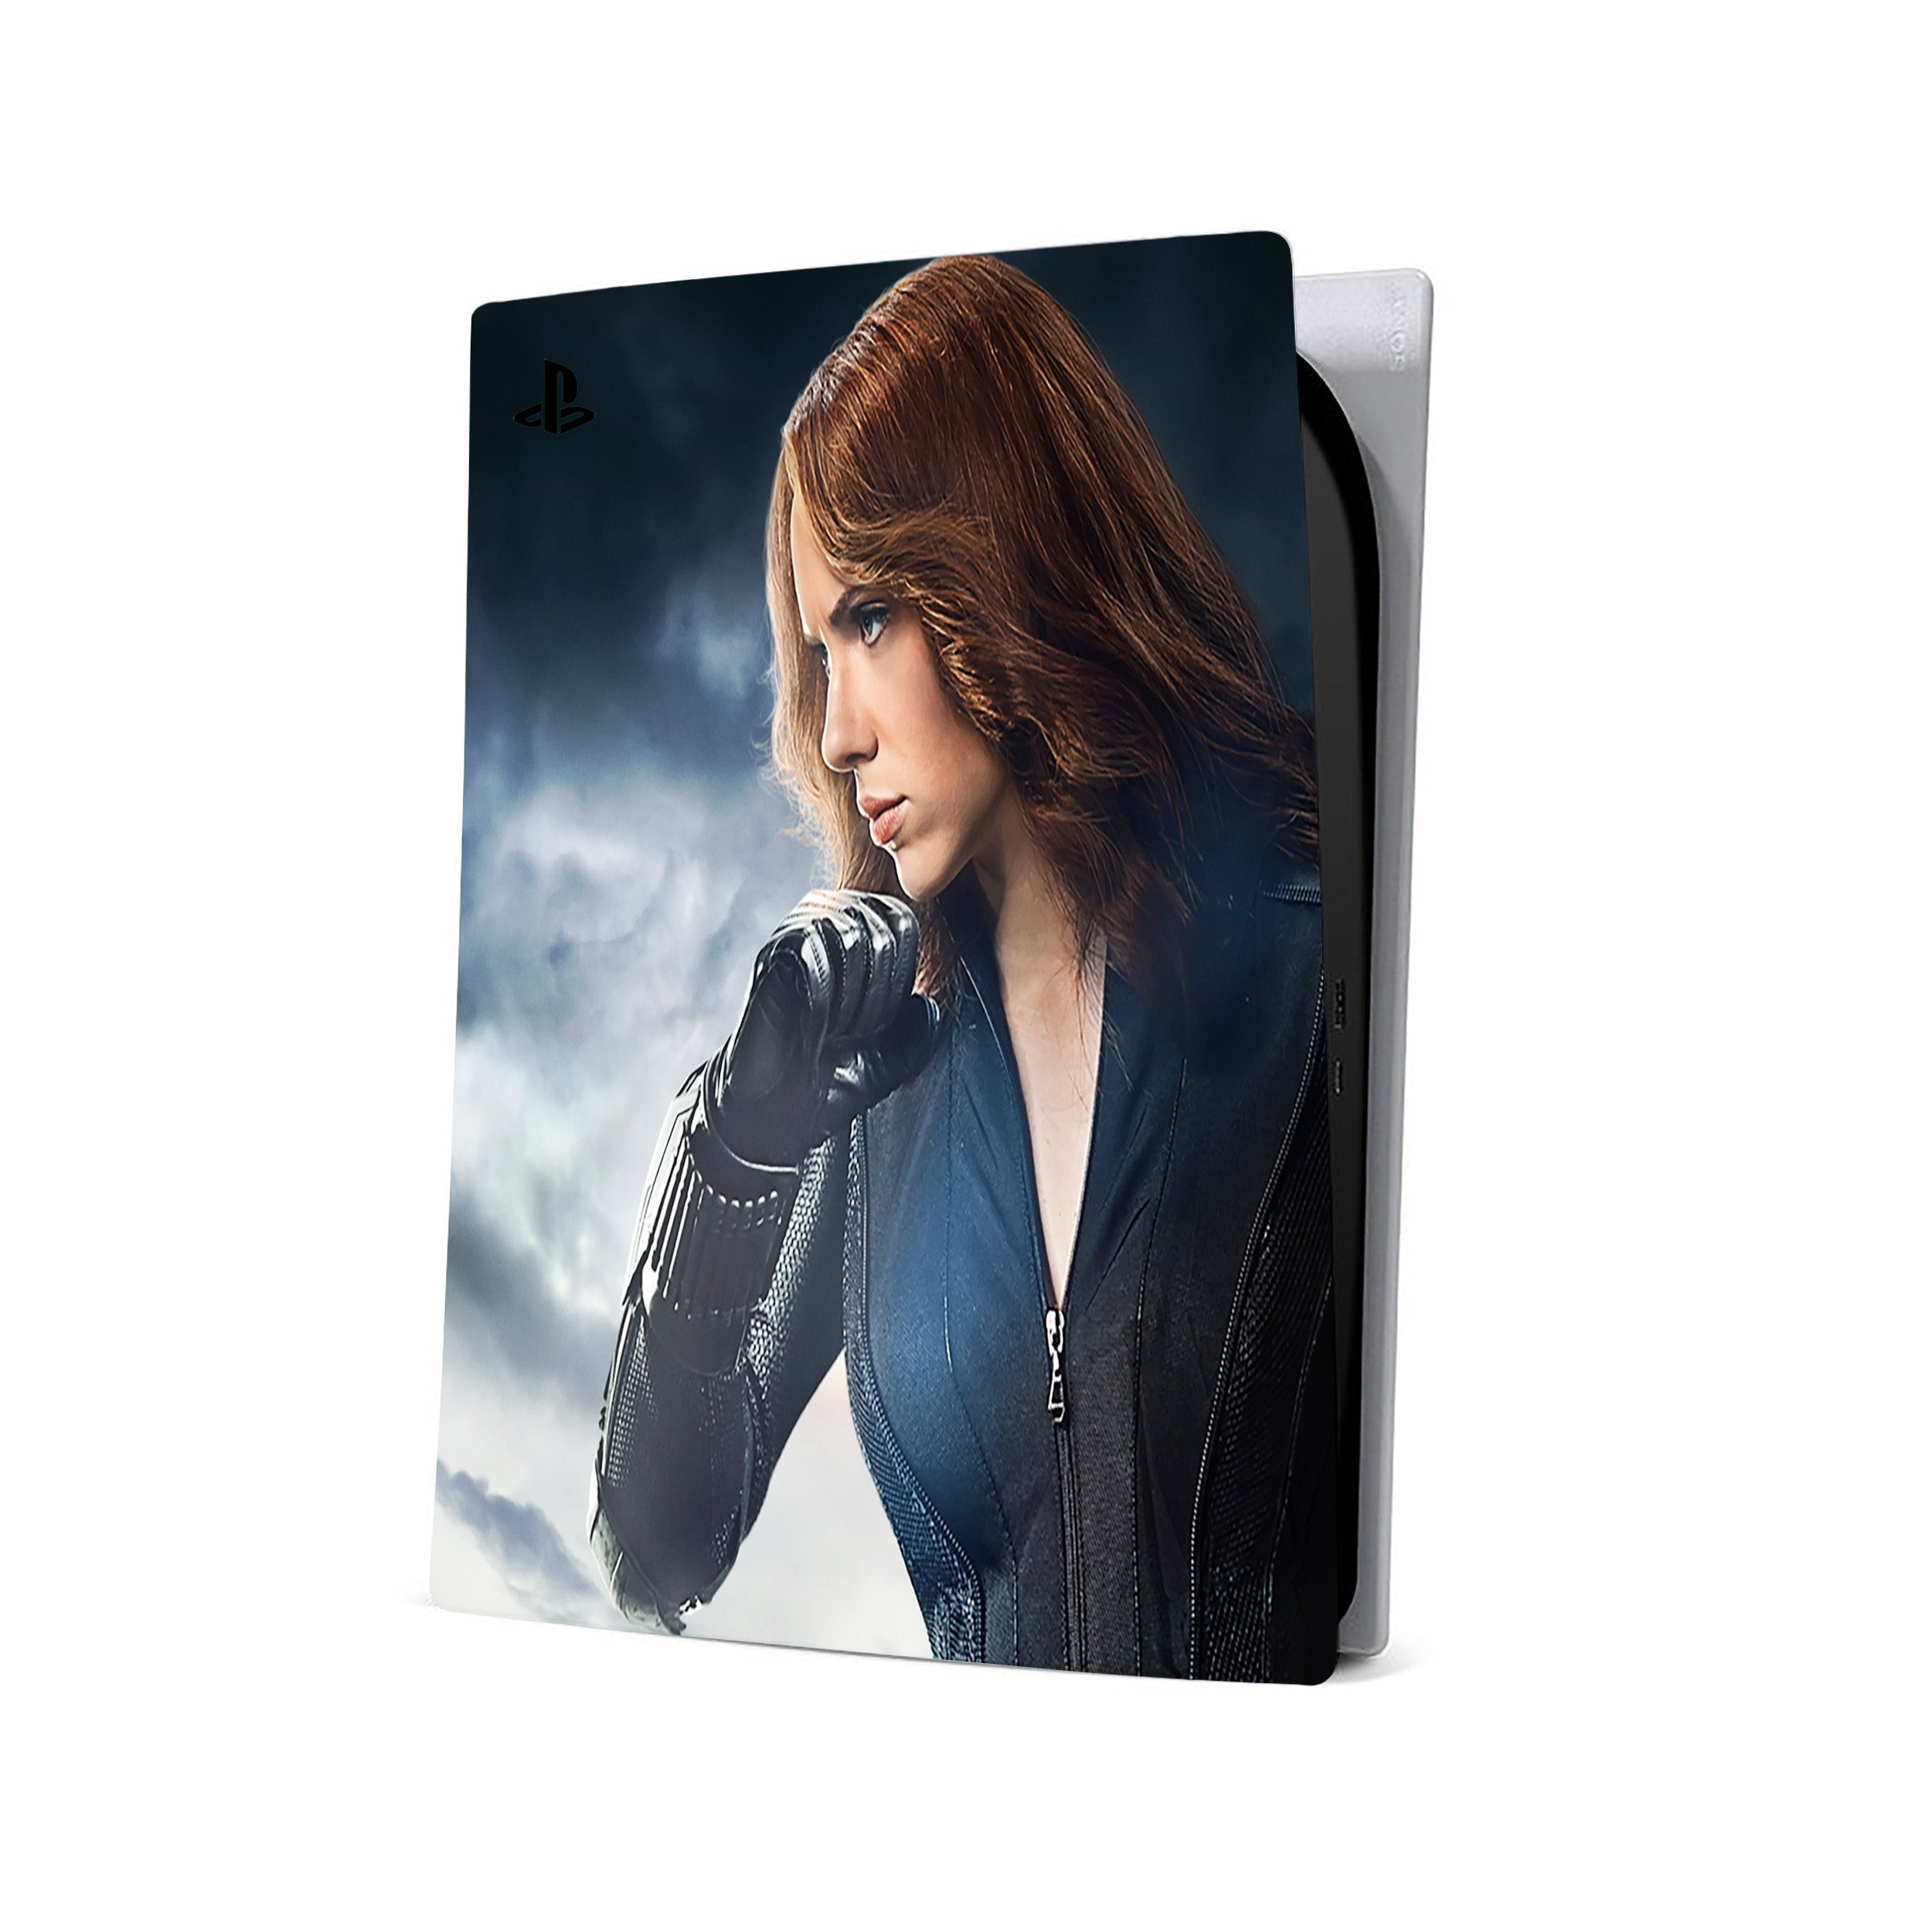 A video game skin featuring a Marvel Black Widow design for the PS5.